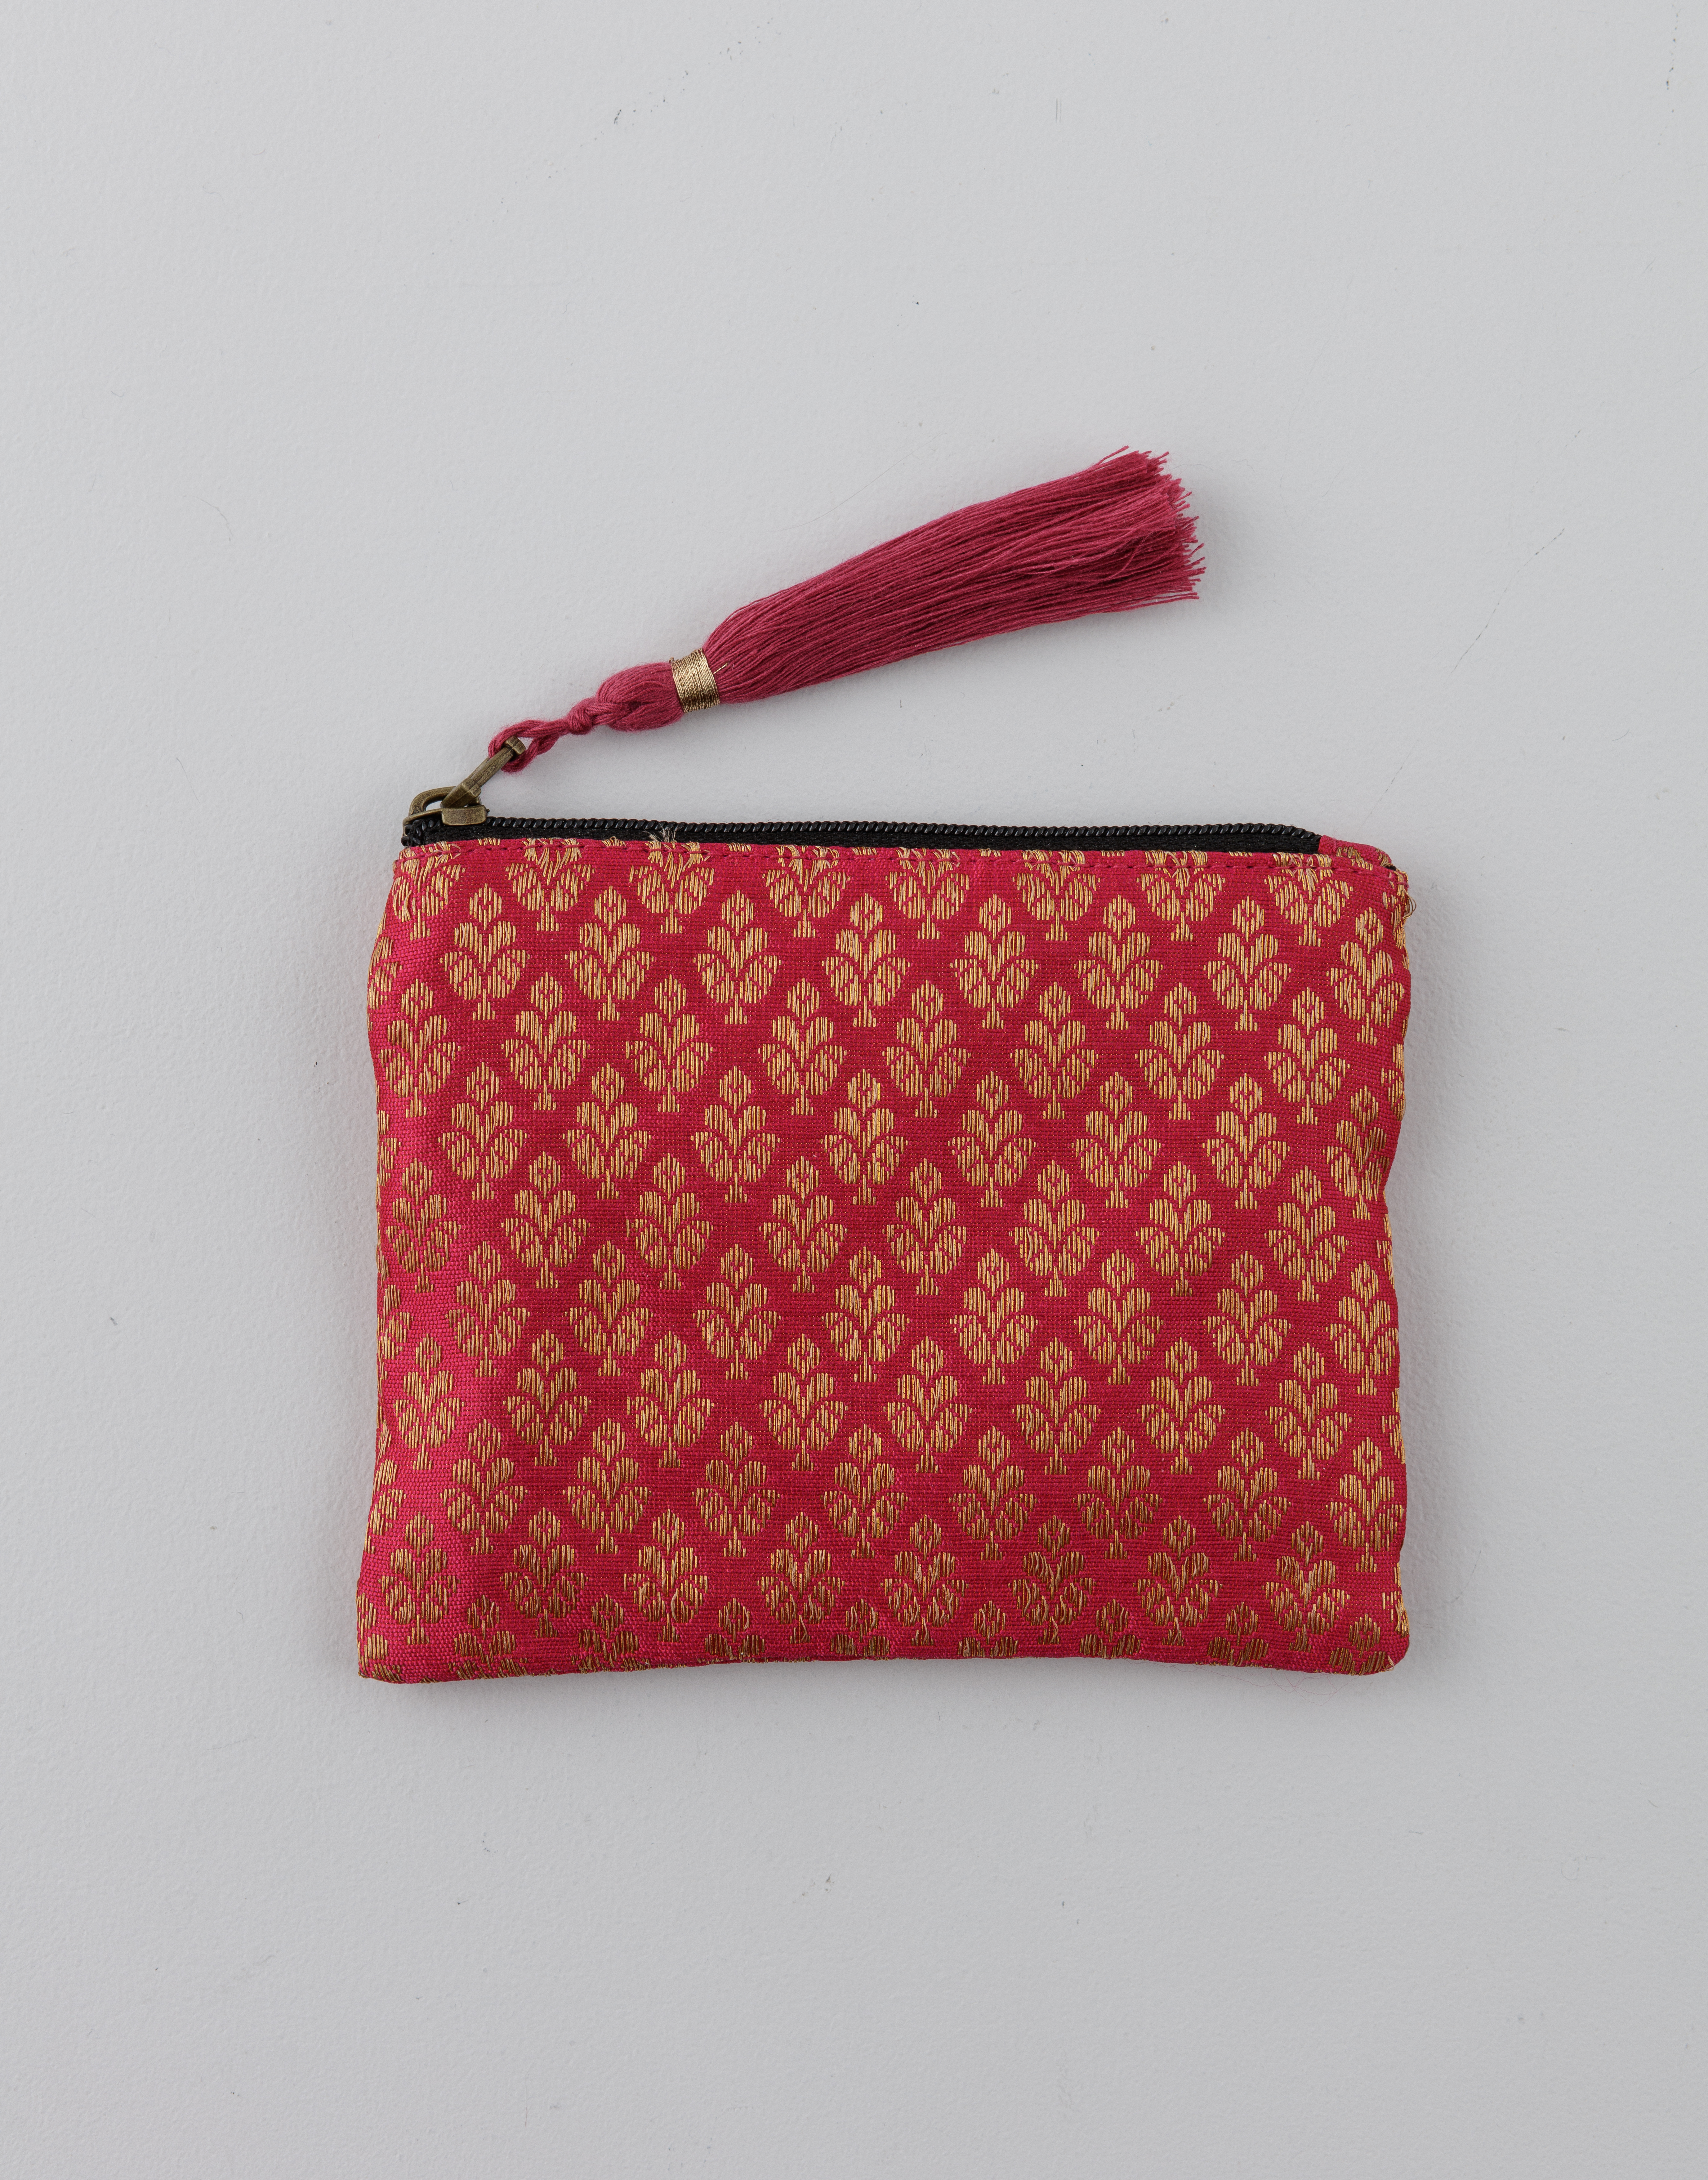 Small patterned coin purse